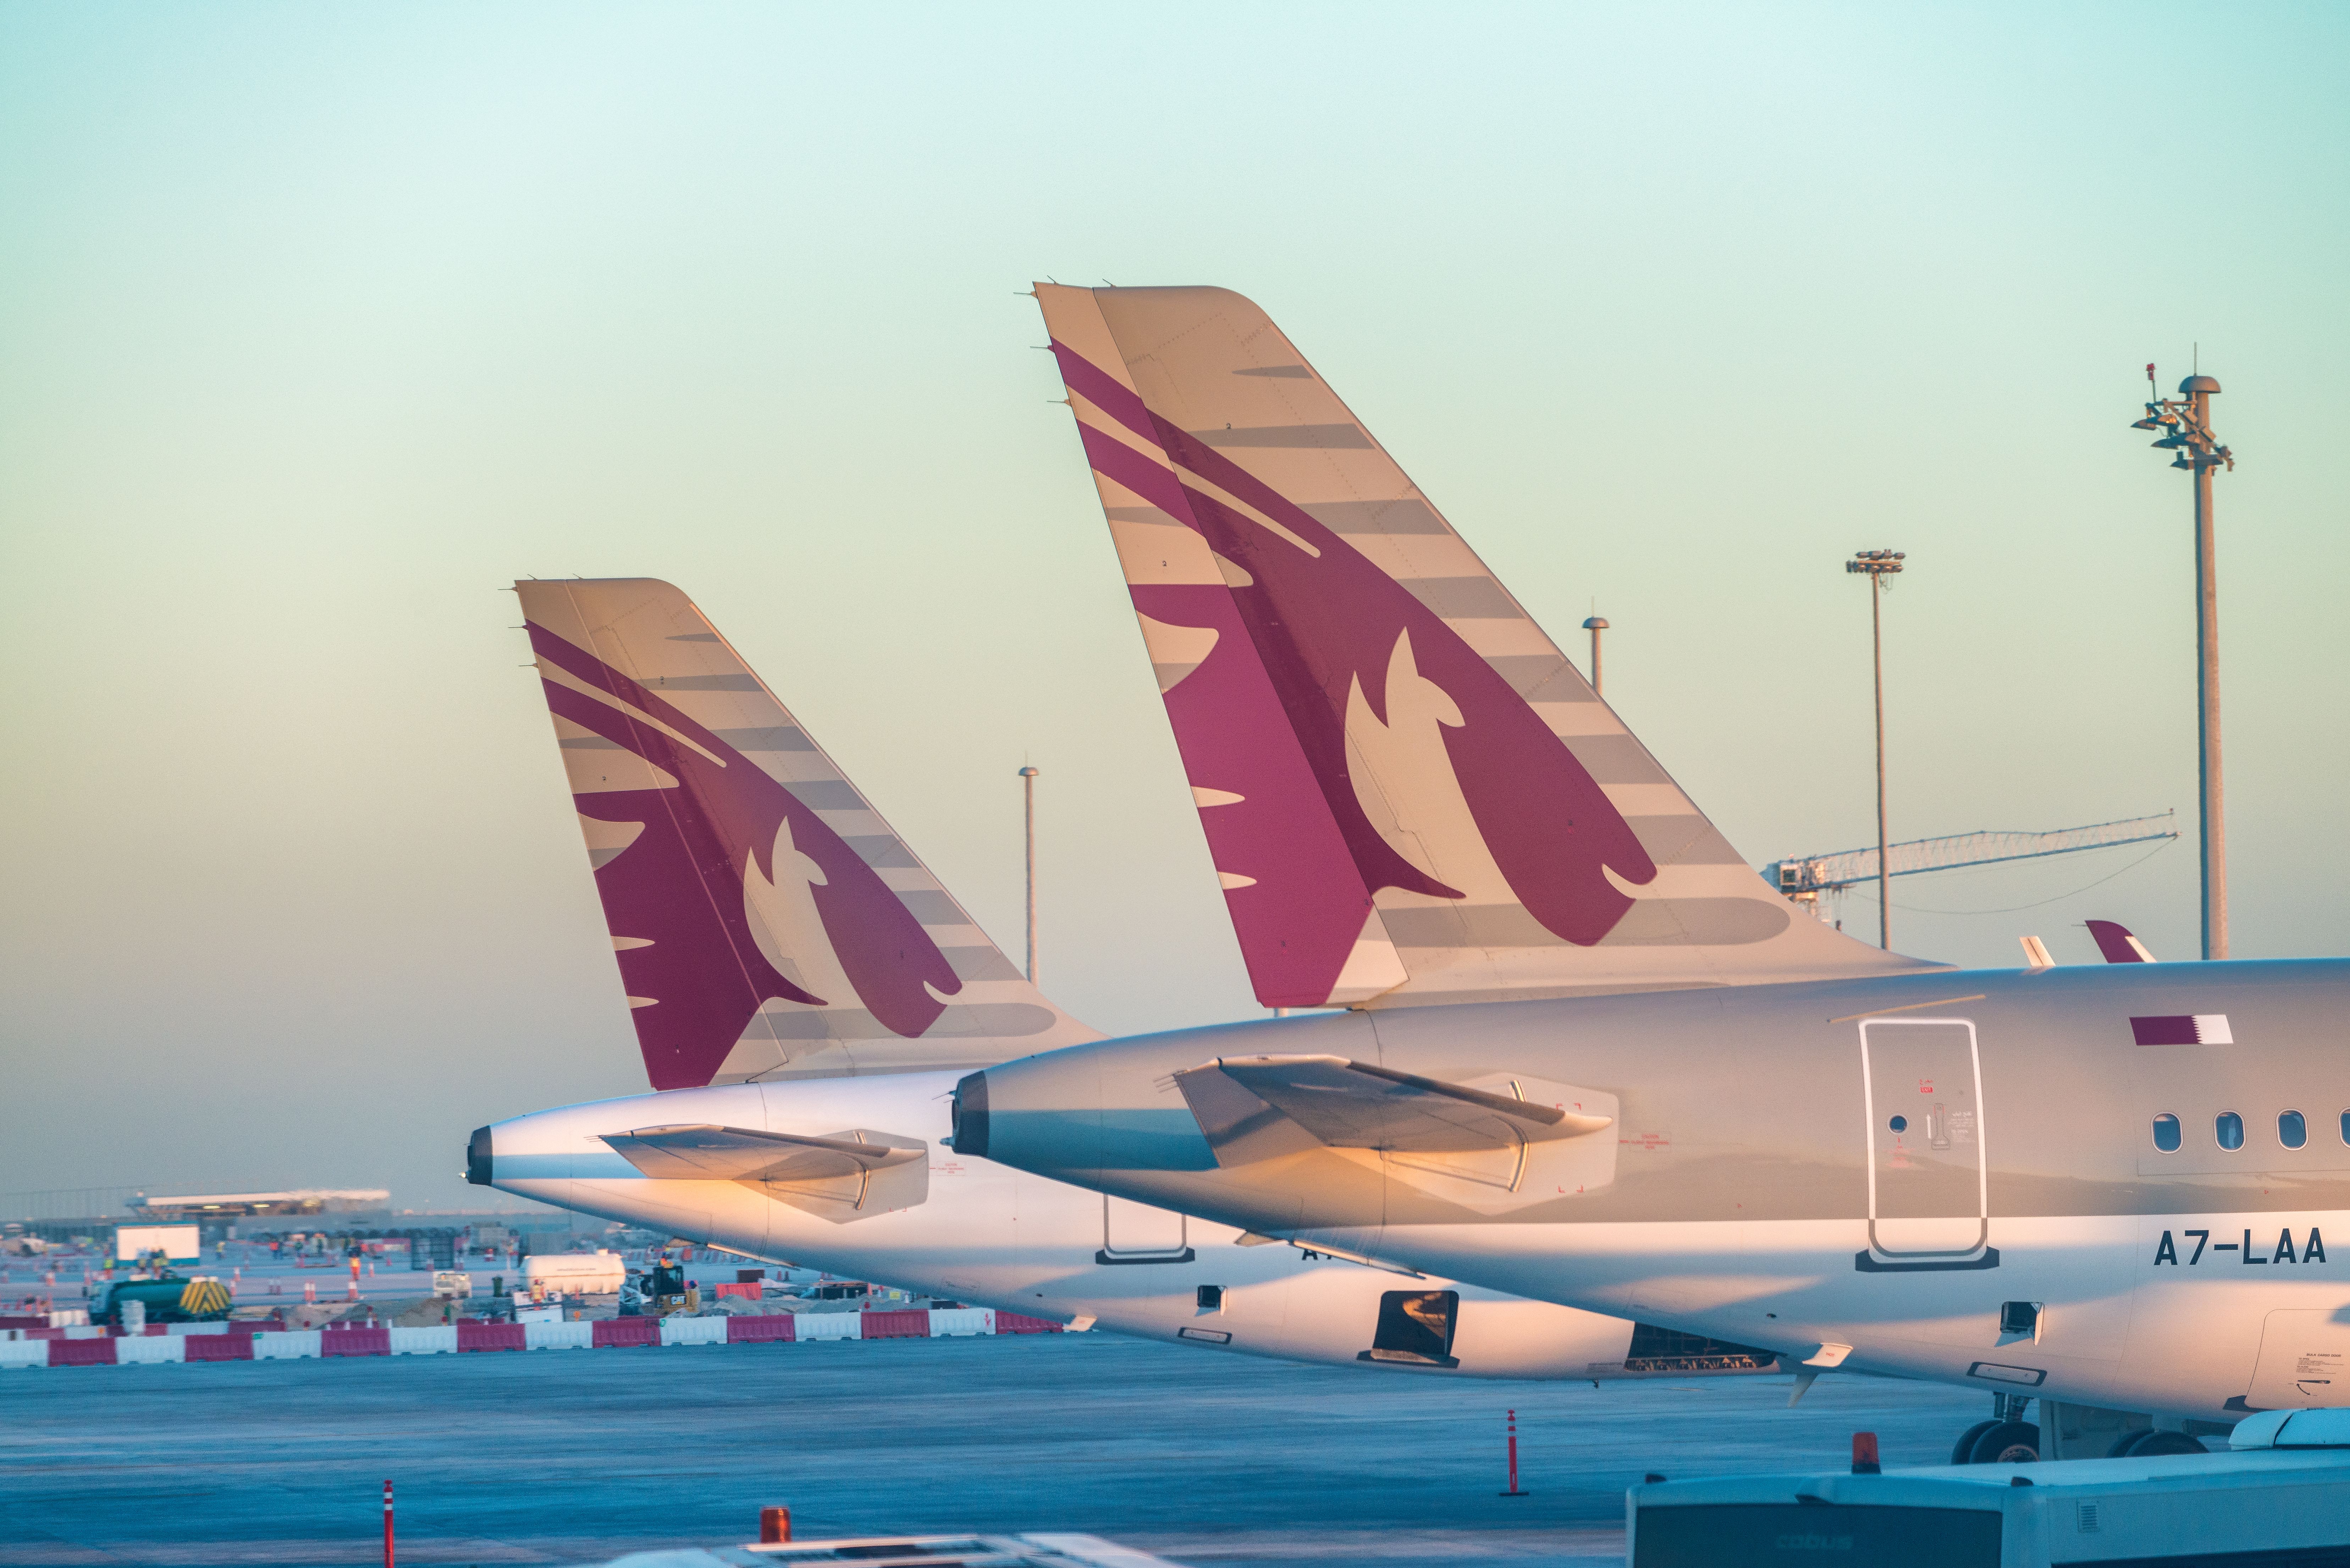 The tails of Two Qatar Airways aircraft at Doha Hammad Airport.